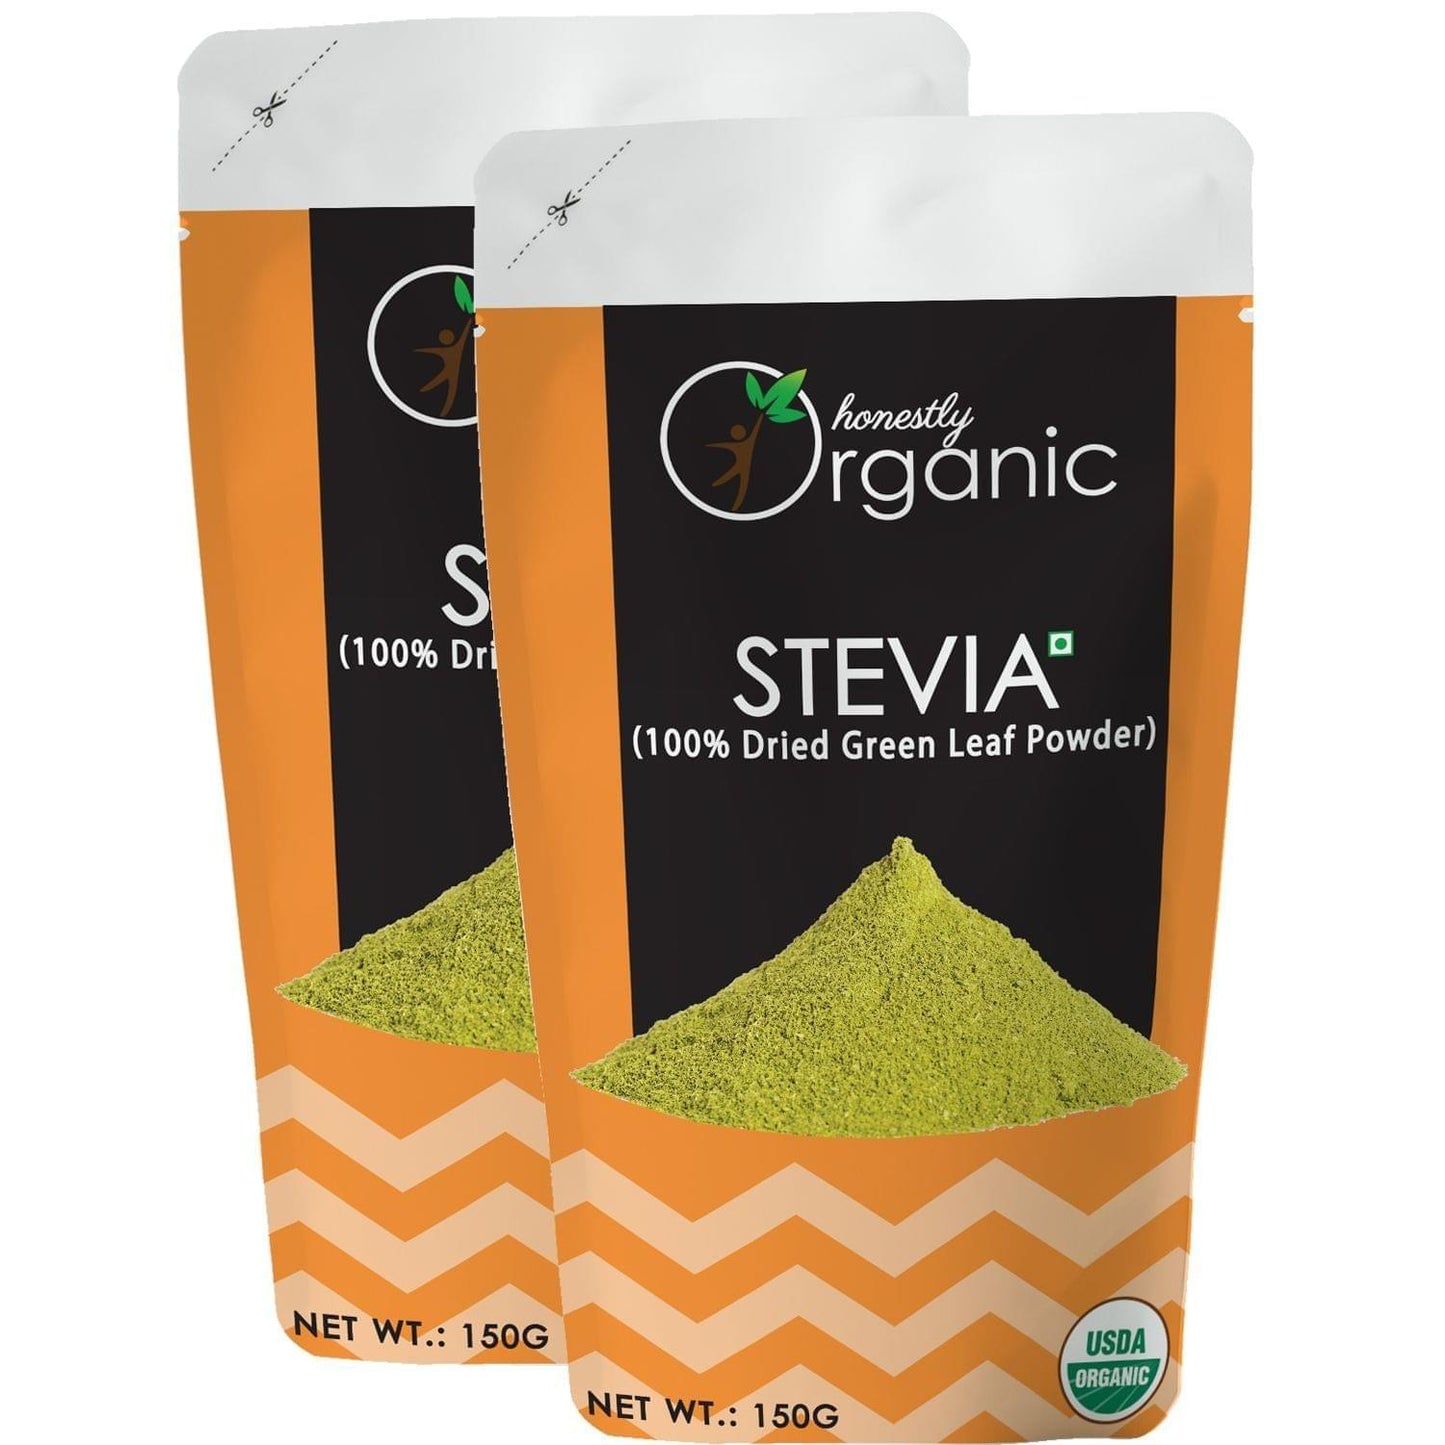 D-Alive Honeslty Organic Stevia Leaf Powder/ Natural Sugar Replacement/ Dried Green Leaf Powder (0 Calories, 0 Carbs, USDA Organic Certified, 100% Pure & Natural) - 150g (Pack of 2)